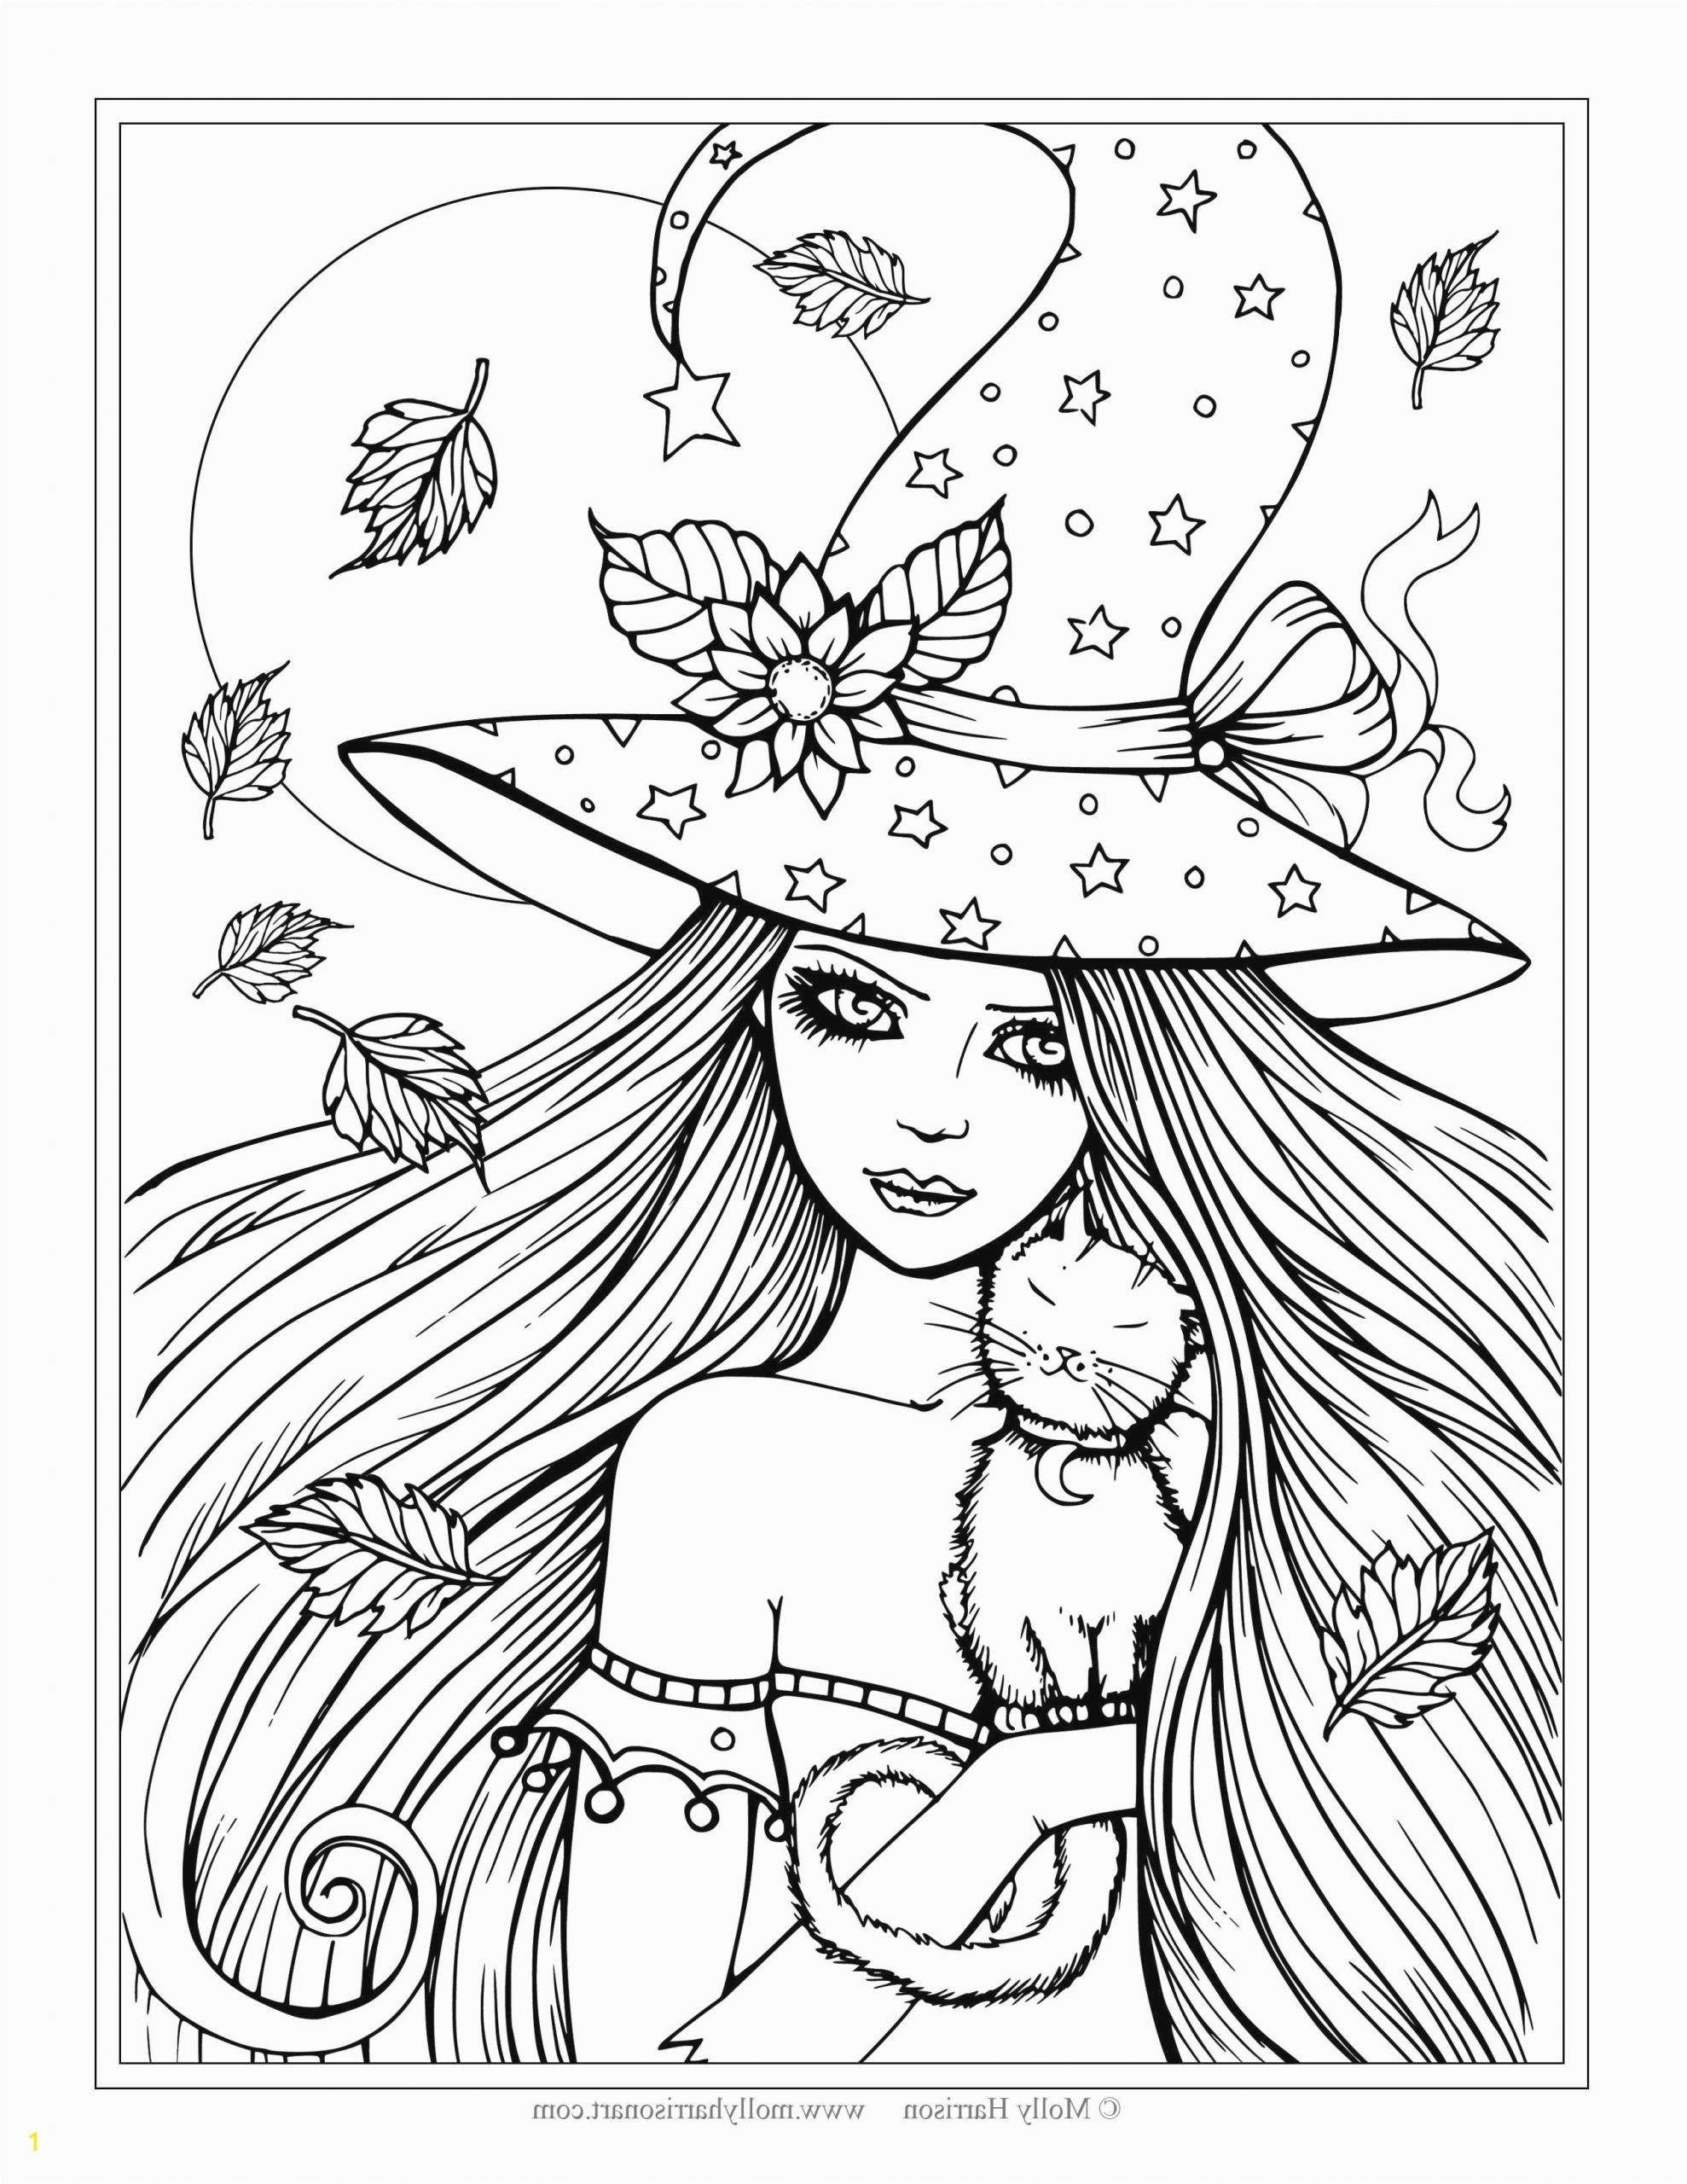 valentines free coloring page beautiful gallery mario color pages witch coloring page lovely crayola pages 0d of valentines free coloring page